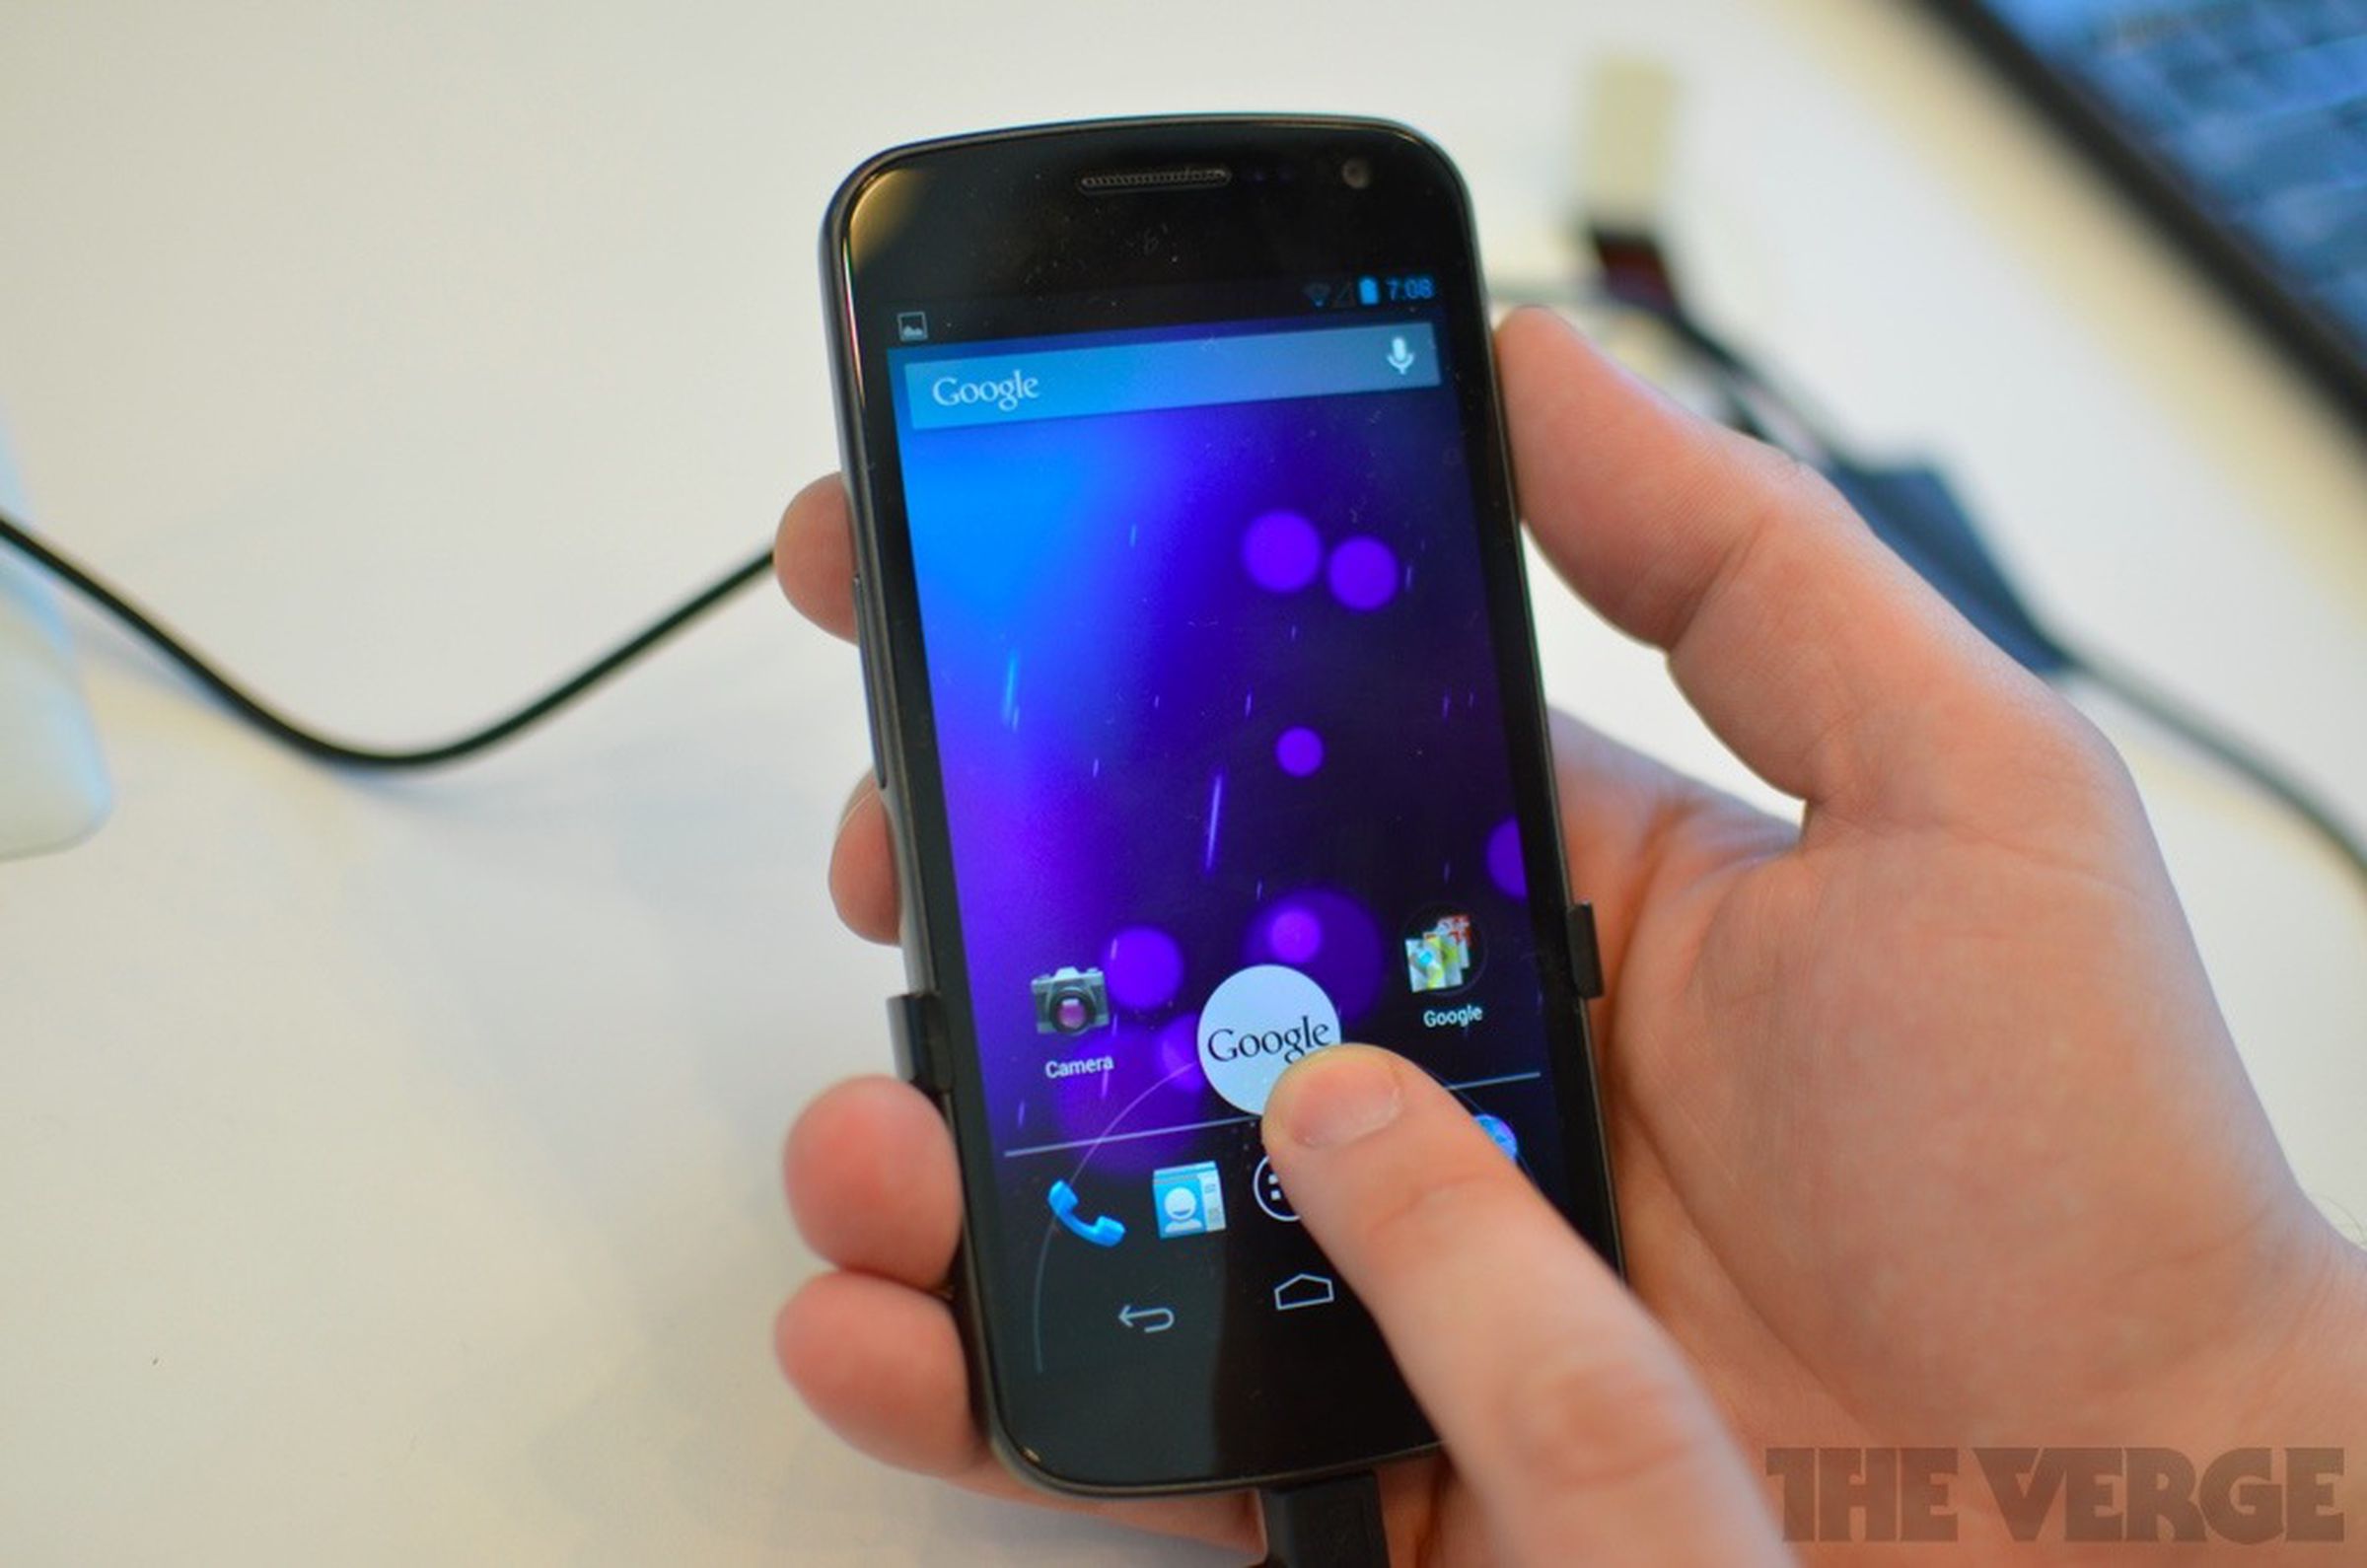 Android 4.1 Jelly Bean hands-on pictures